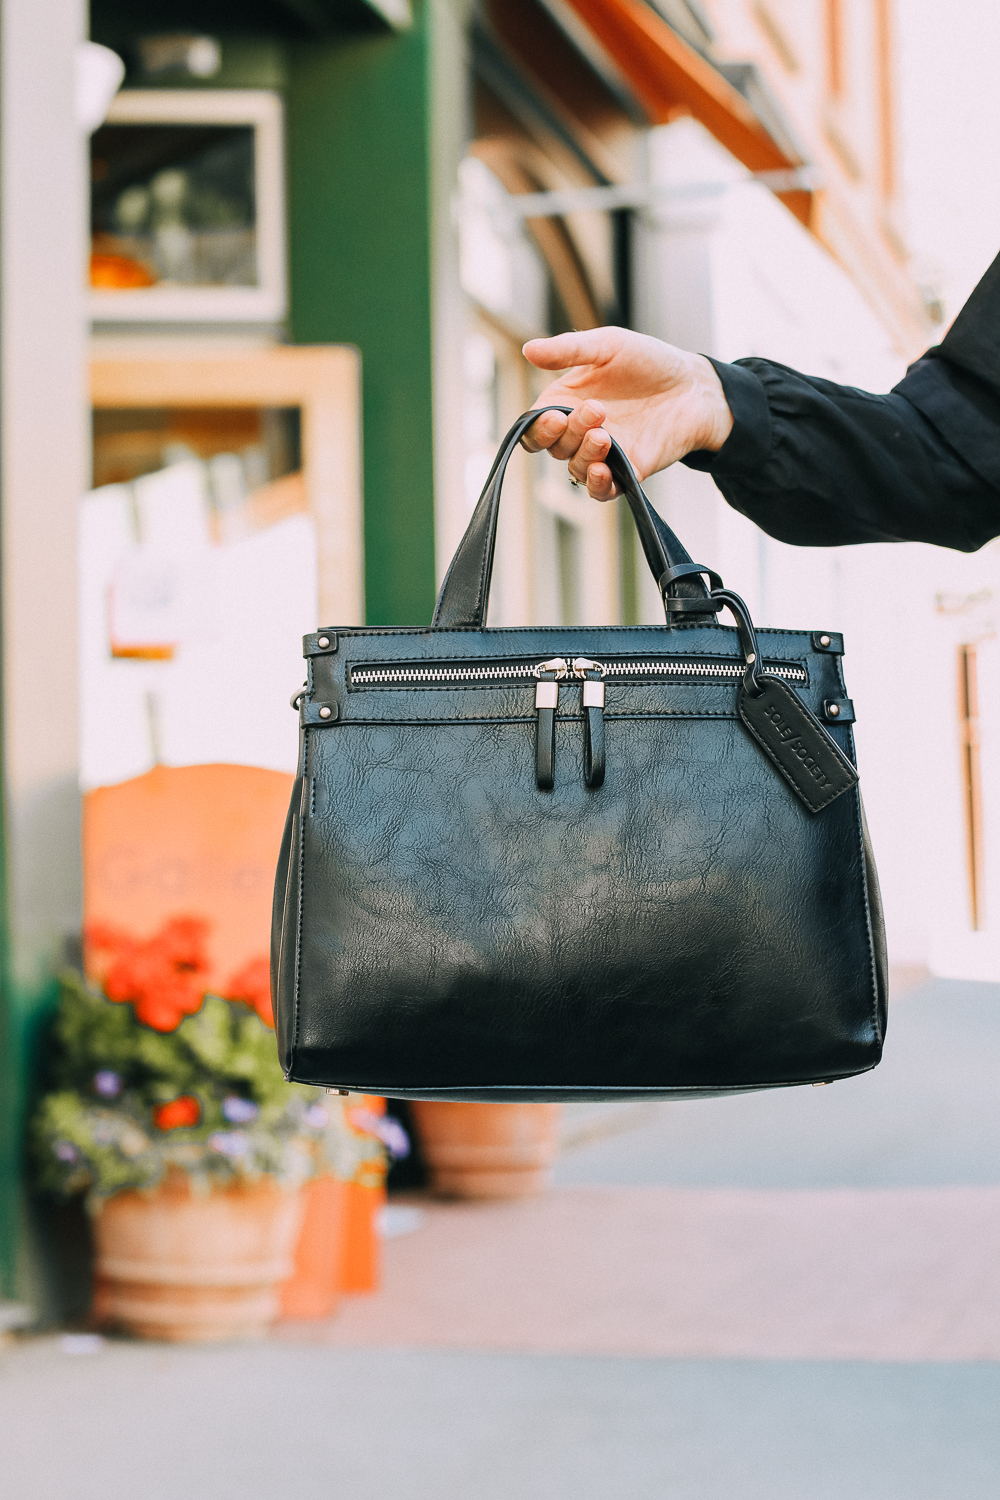 Vegan leather black satchel from Sole Society